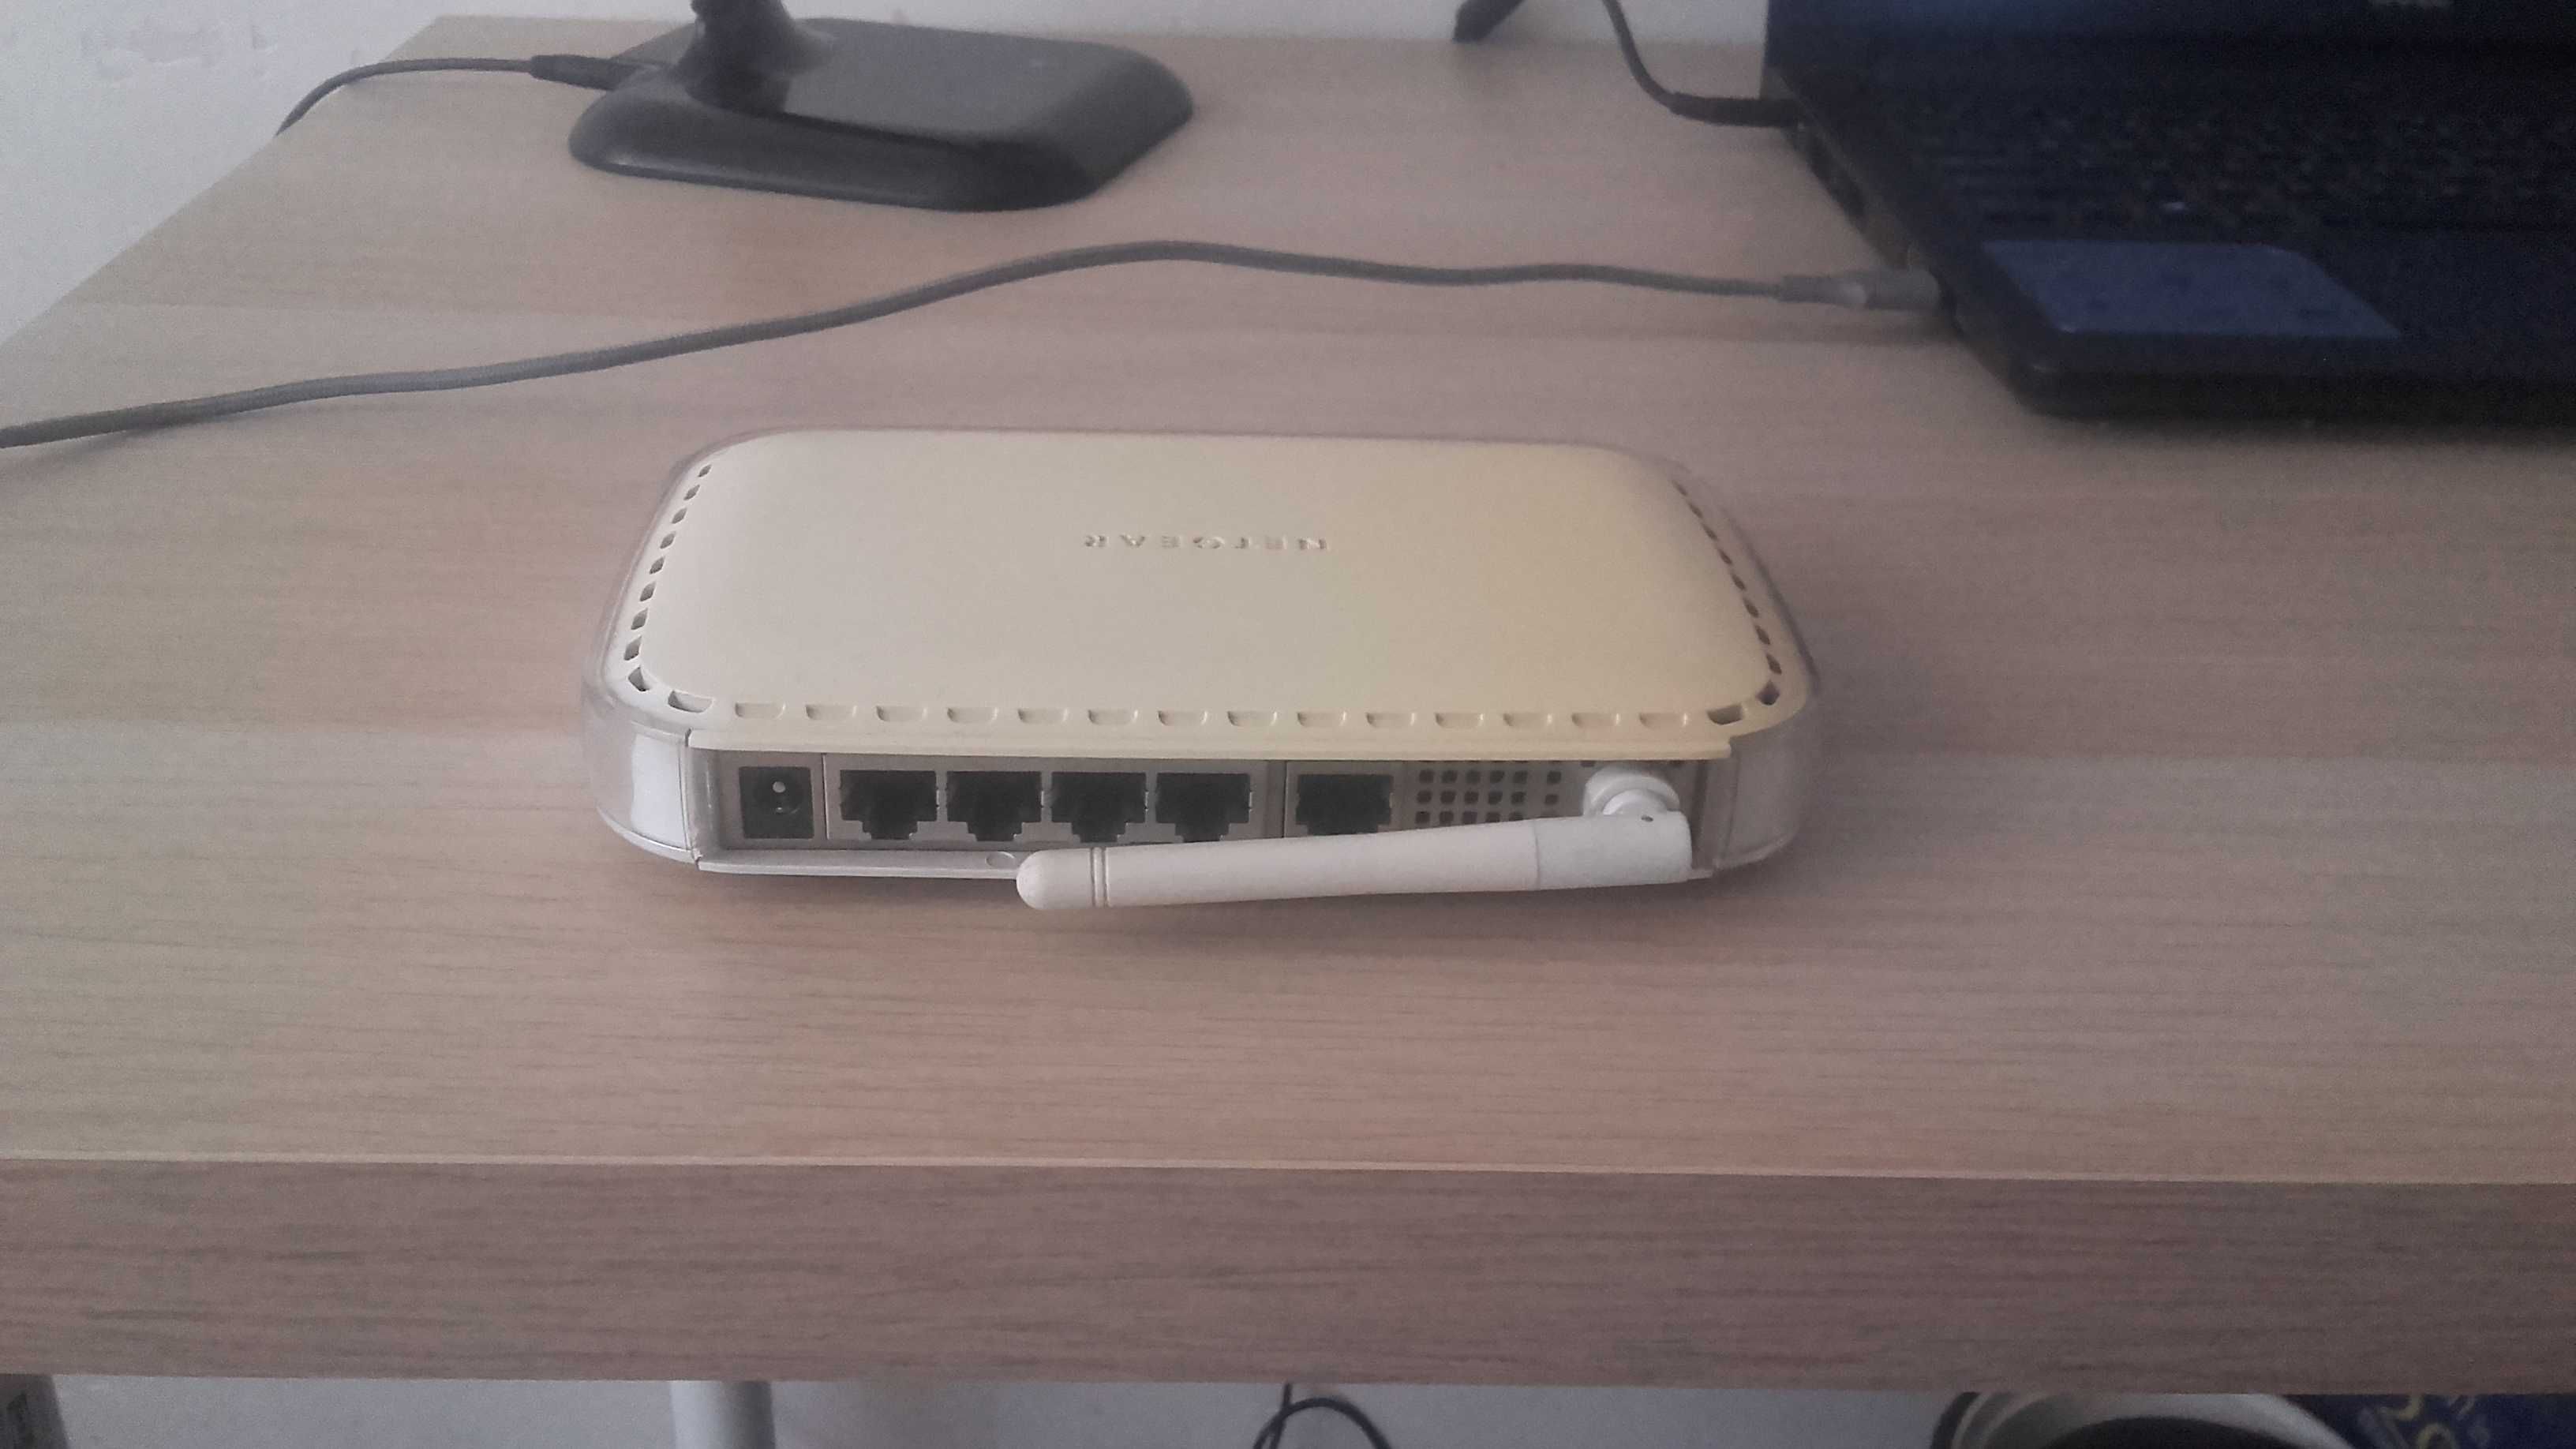 Netger 54 Mbps wireless router